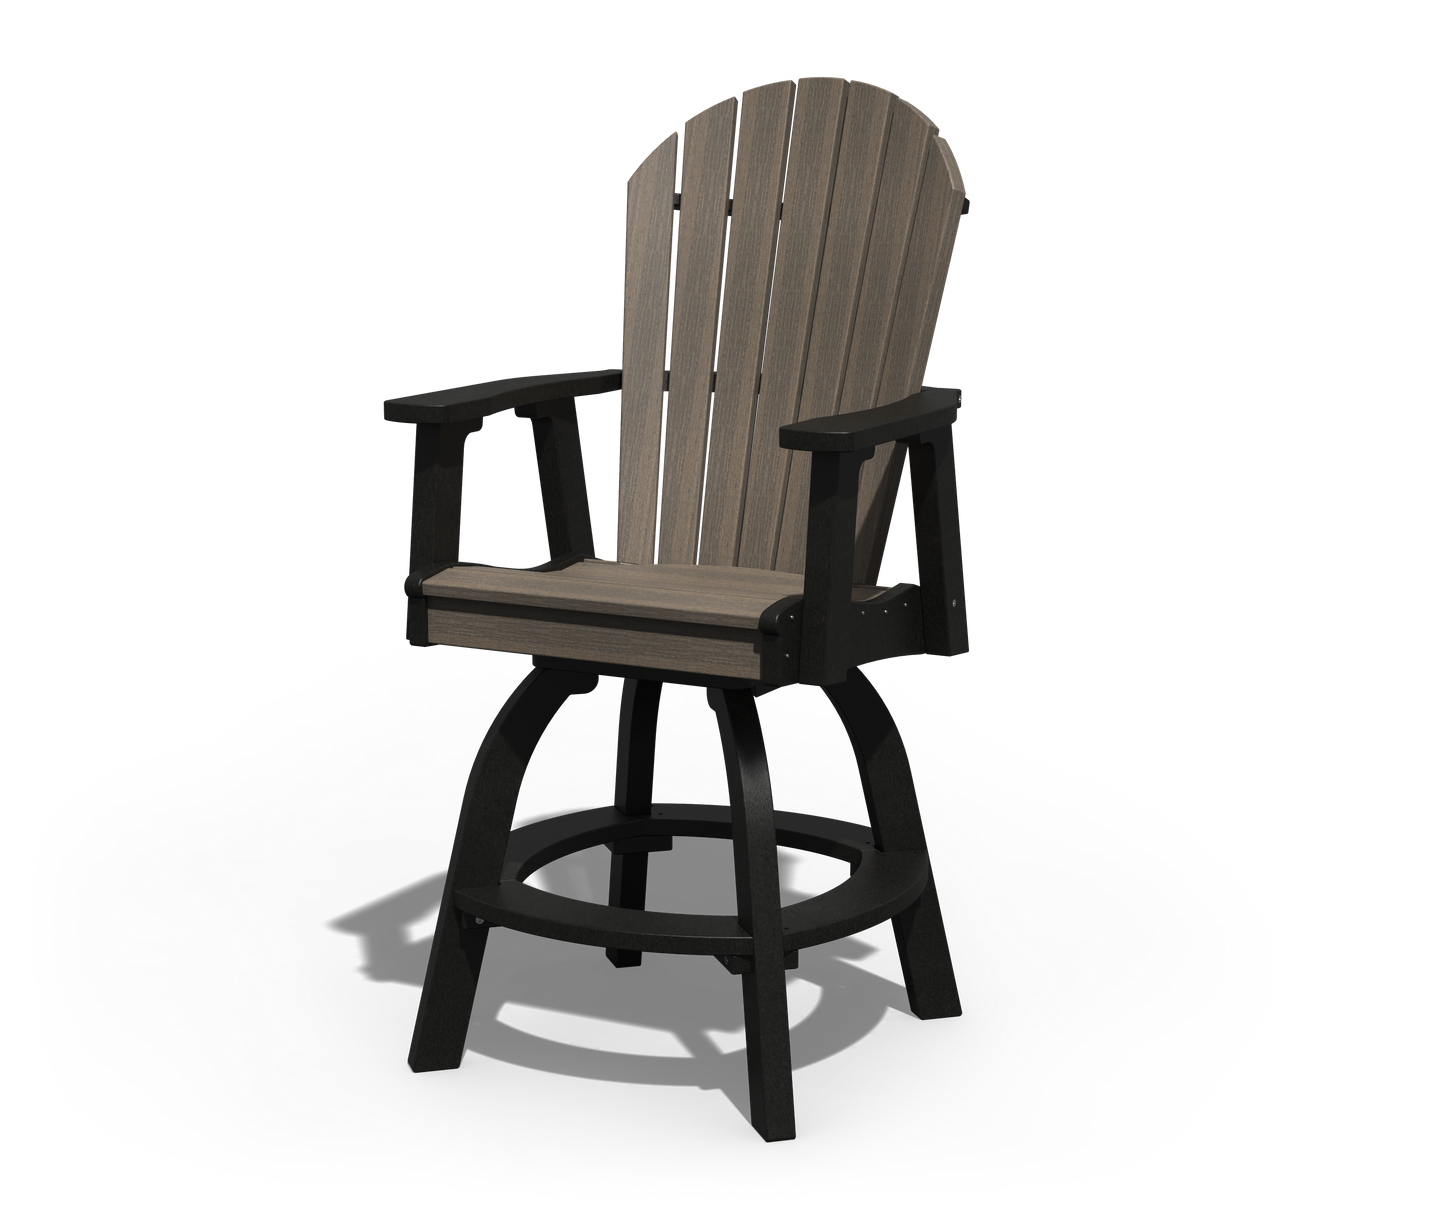 Patiova Recycled Plastic Adirondack Swivel Chair (Bar Height) - LEAD TIME TO SHIP 3 WEEKS